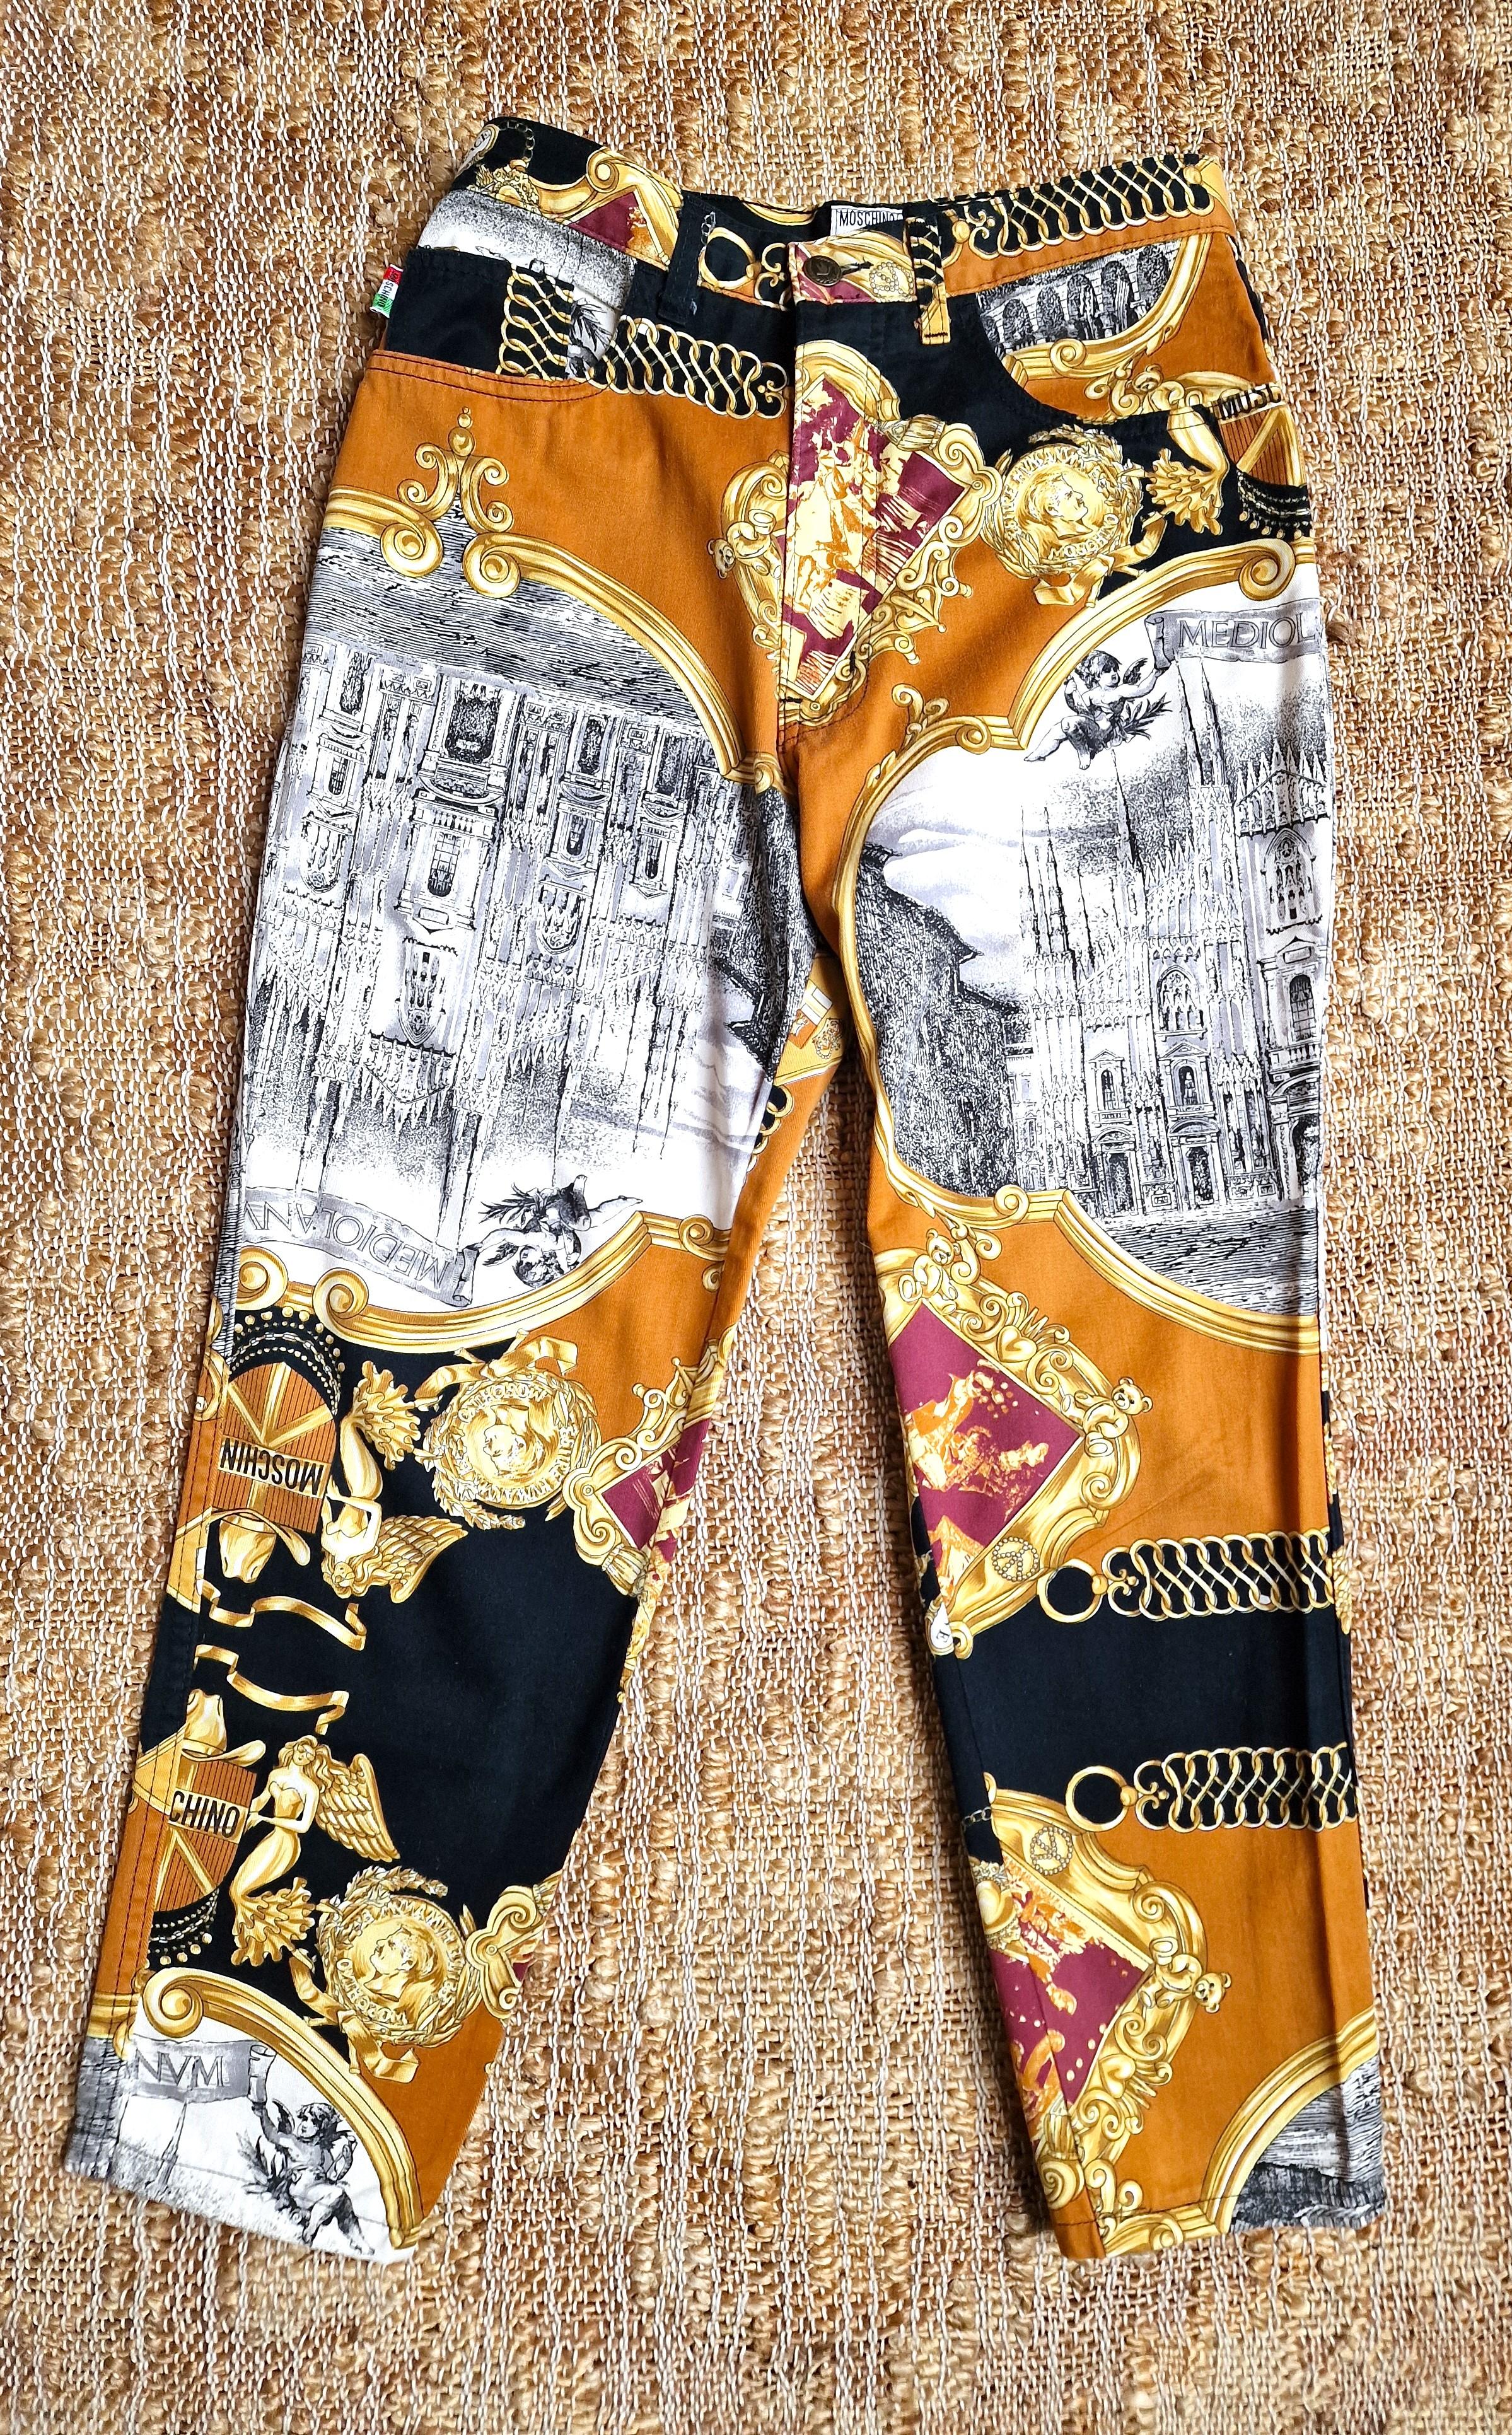 Vintage 90's Moschino baroque print pants! Baroque frames, catherdral,  chains, coins, gravures, teddy bear etc. Looks fabulous!
Milan cathedral scenery!

100% cotton.
EXCELLENT condition!

SIZE
Medium.
Marked size: 30.
Length: 89 cm / 35